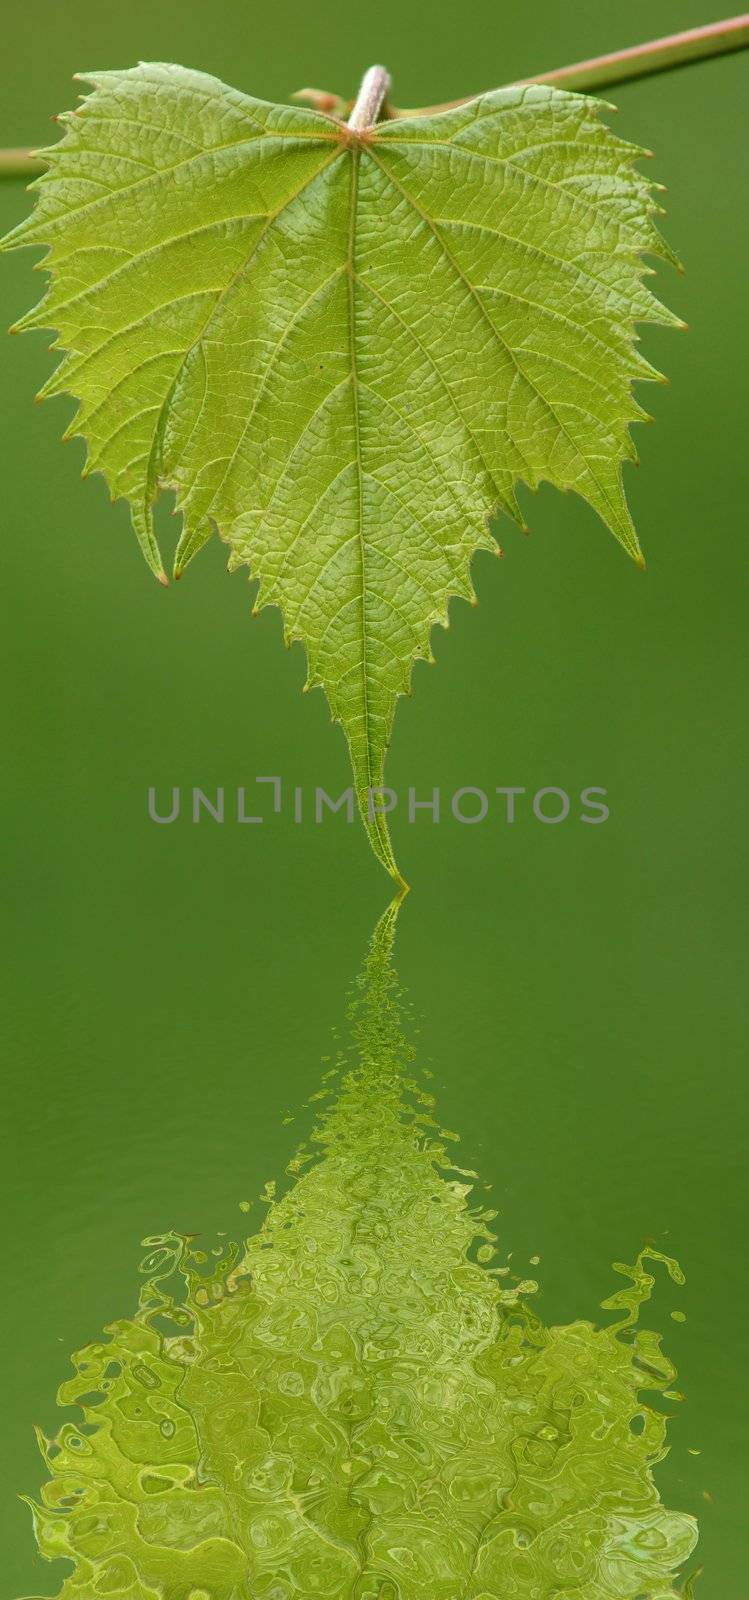 Reflect of a green grape leaf in water